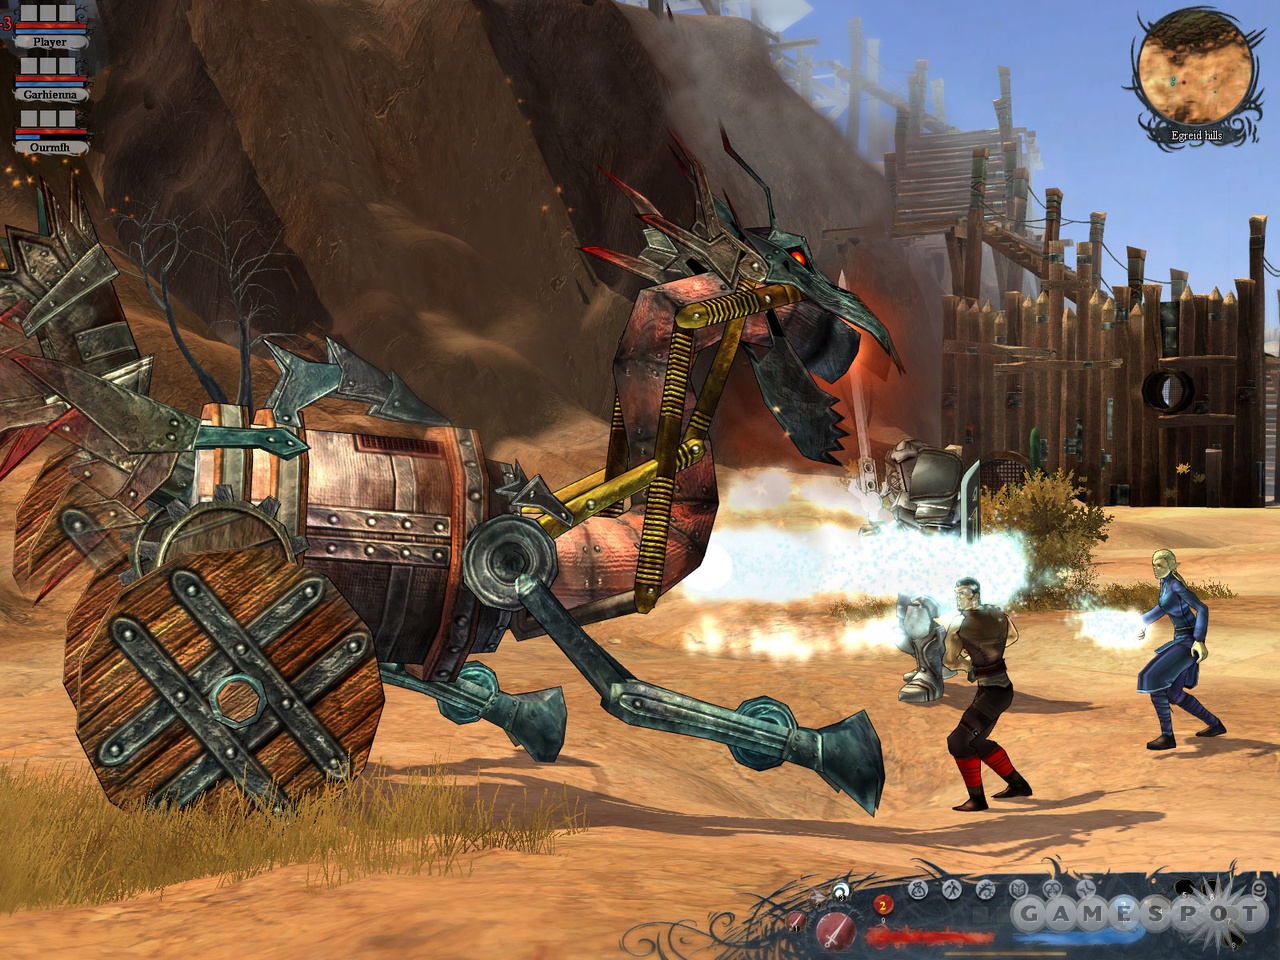 The game's skill system will let you play as a magic-flinging swordsman or a technologically inclined archer with a firearm.